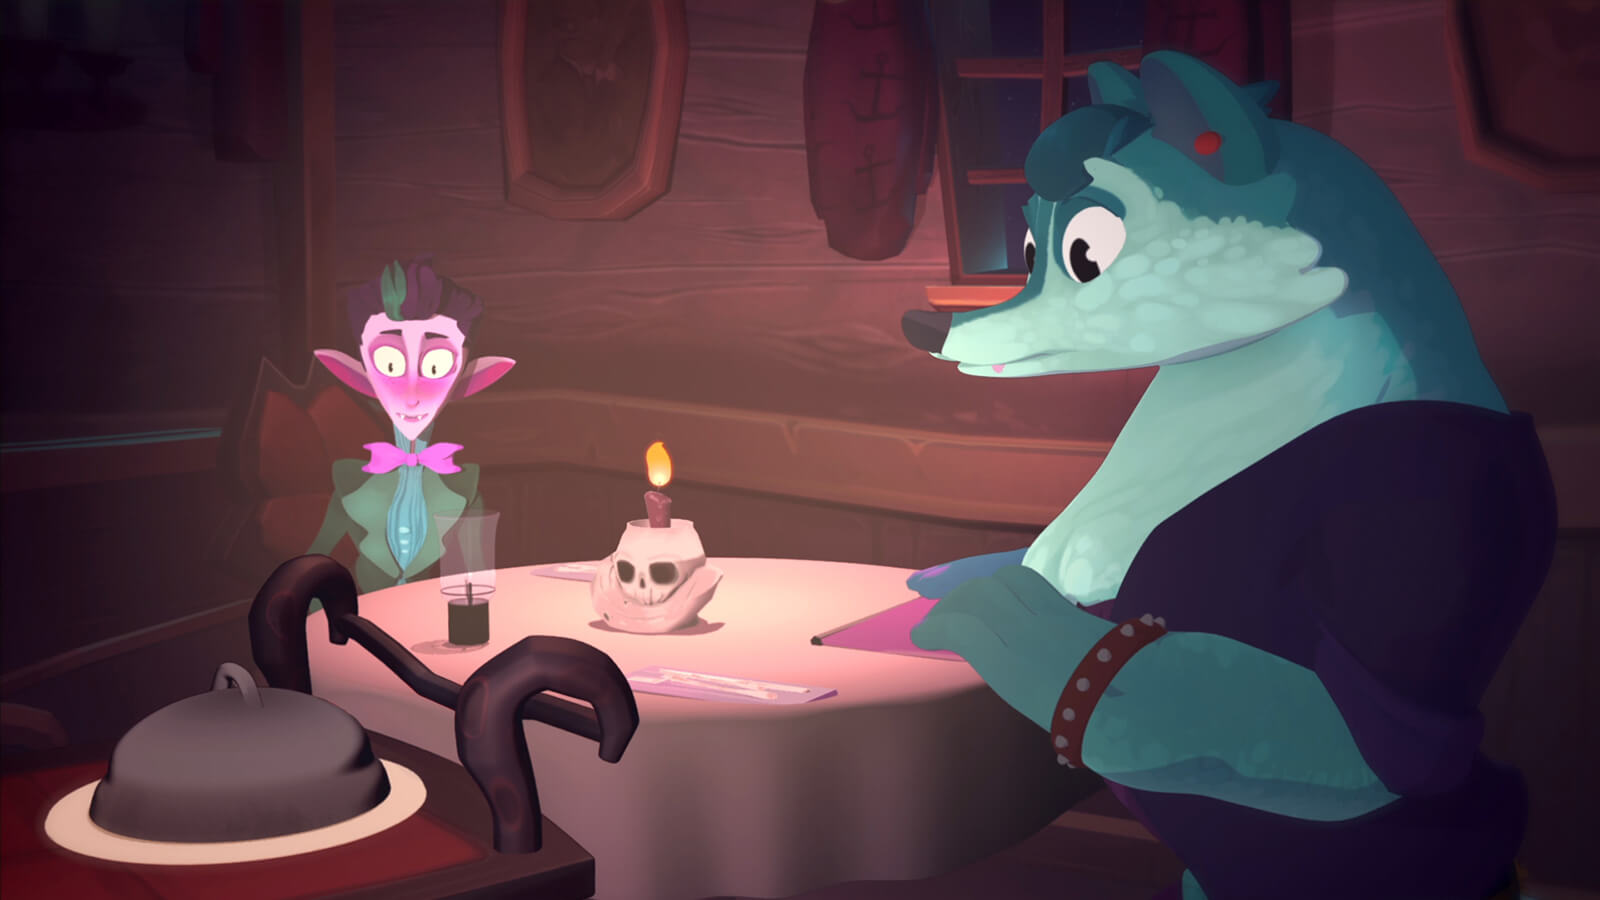 A blue werewolf and pink vampire sitting at a table look at a nearby cart with a lidded plate on it